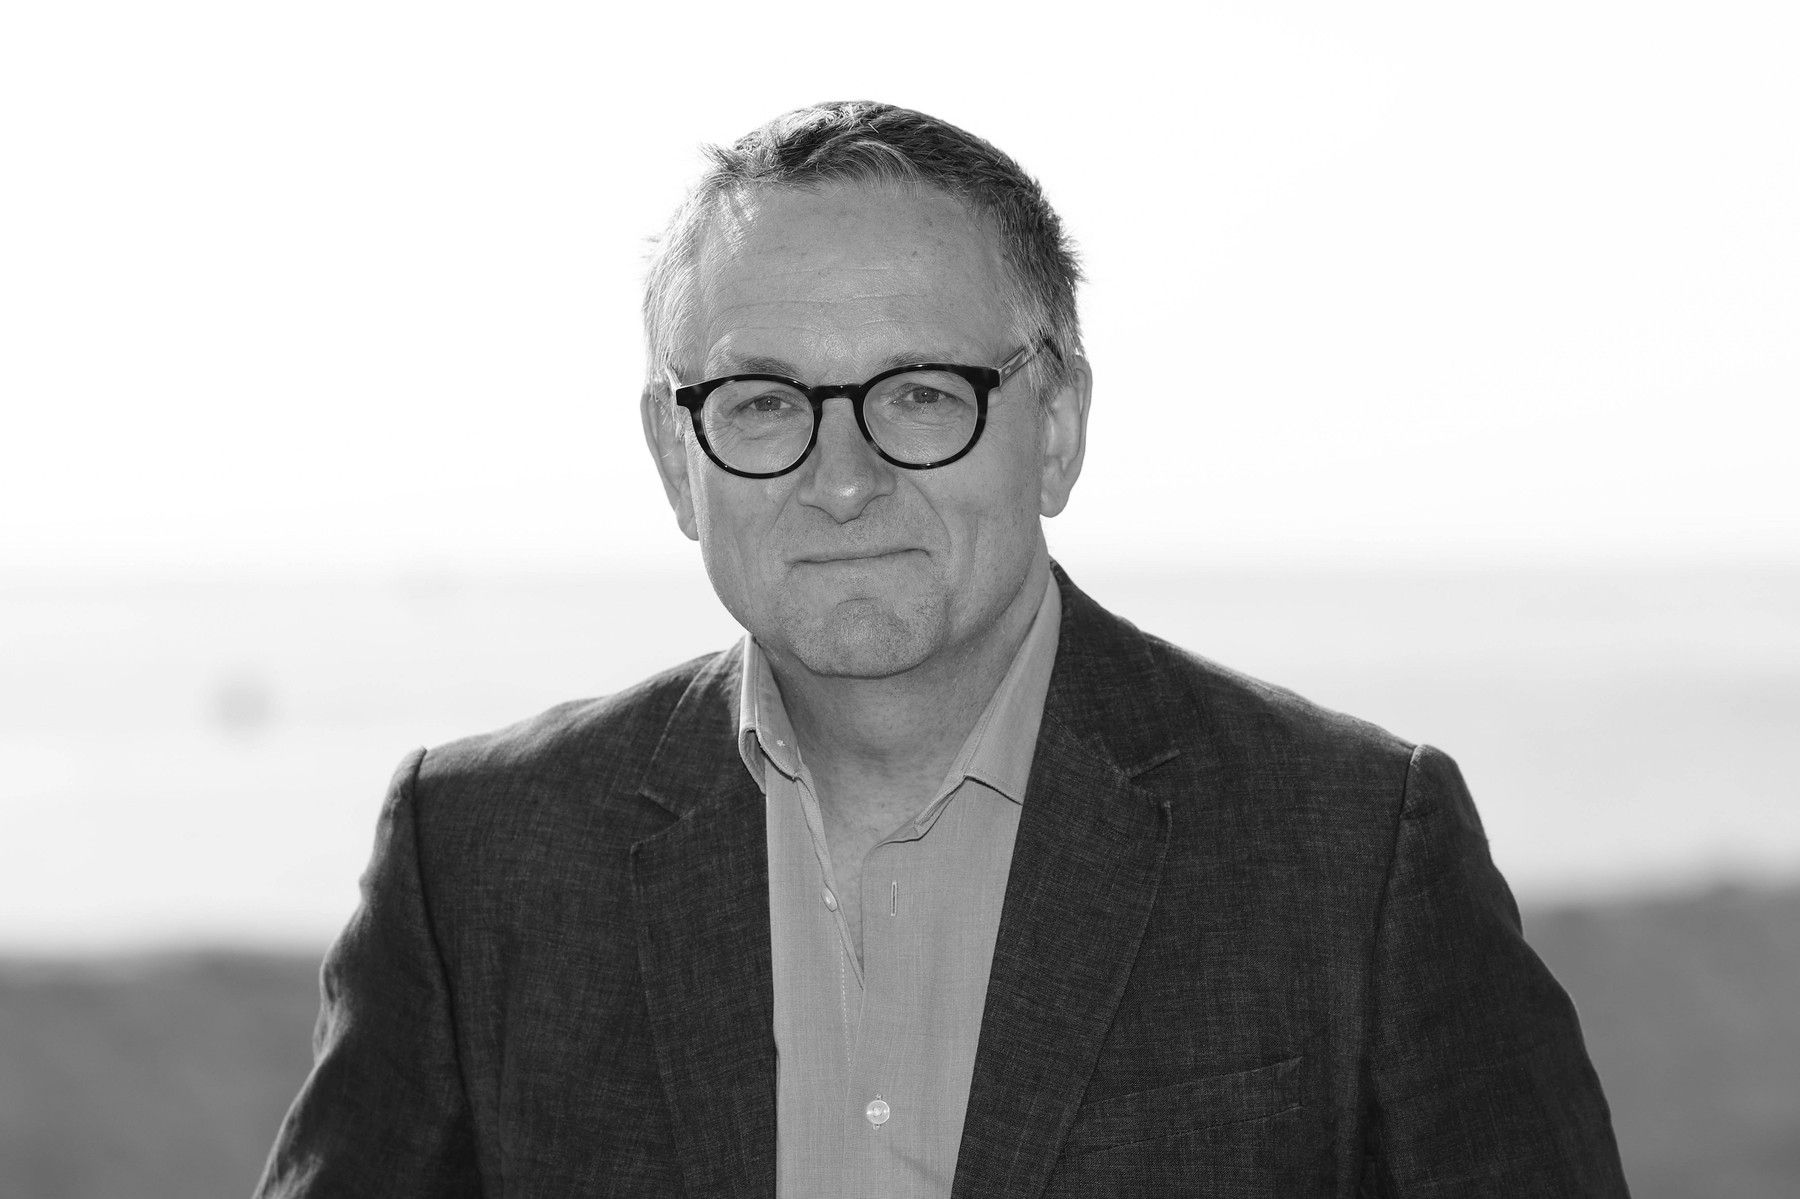 Event HOW TO LIVE TO 101, Dr Michael Mosley, MIPCOM, Palais des Festivals et des Congres, Cannes FRANCE - 17/10/2022//SYSPEO_sysA038/2210180047/Credit:SYSPEO/SIPA/2210180056,Image: 731353953, License: Rights-managed, Restrictions: , Model Release: no, Credit line: SYSPEO / Sipa Press / Profimedia